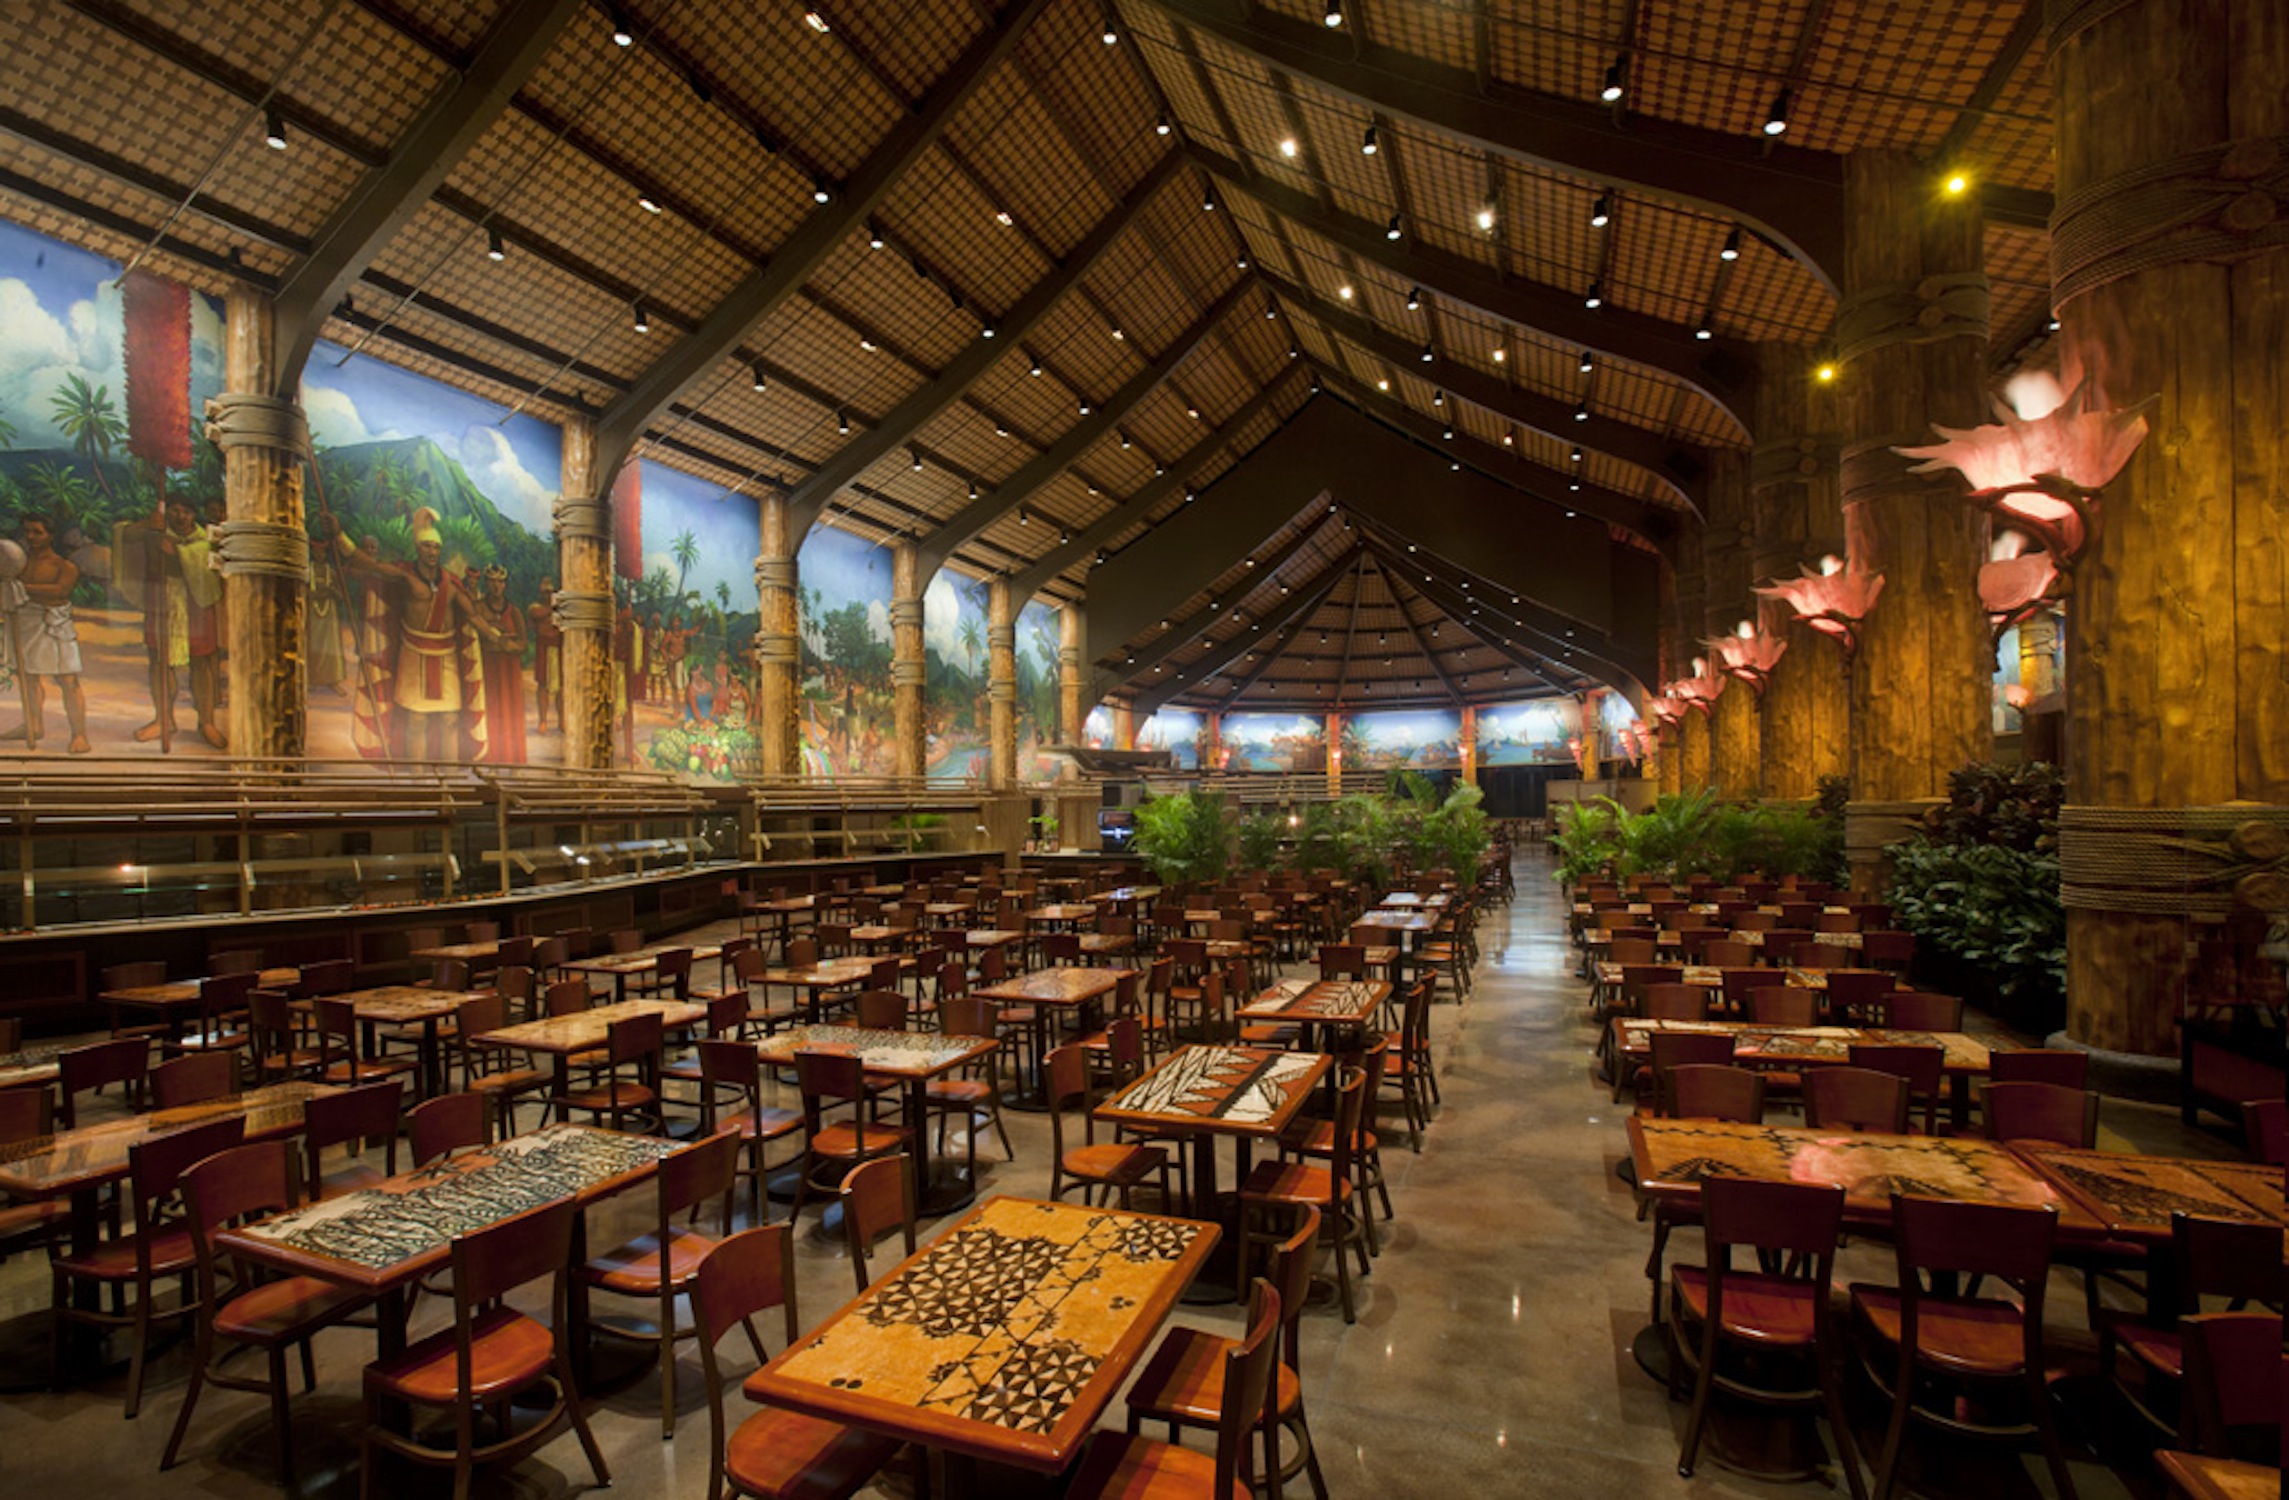 PCC opened the renovated Gateway restaurant in 2011, with a new design that showcases the cultural architecture of authentic Hawaii.